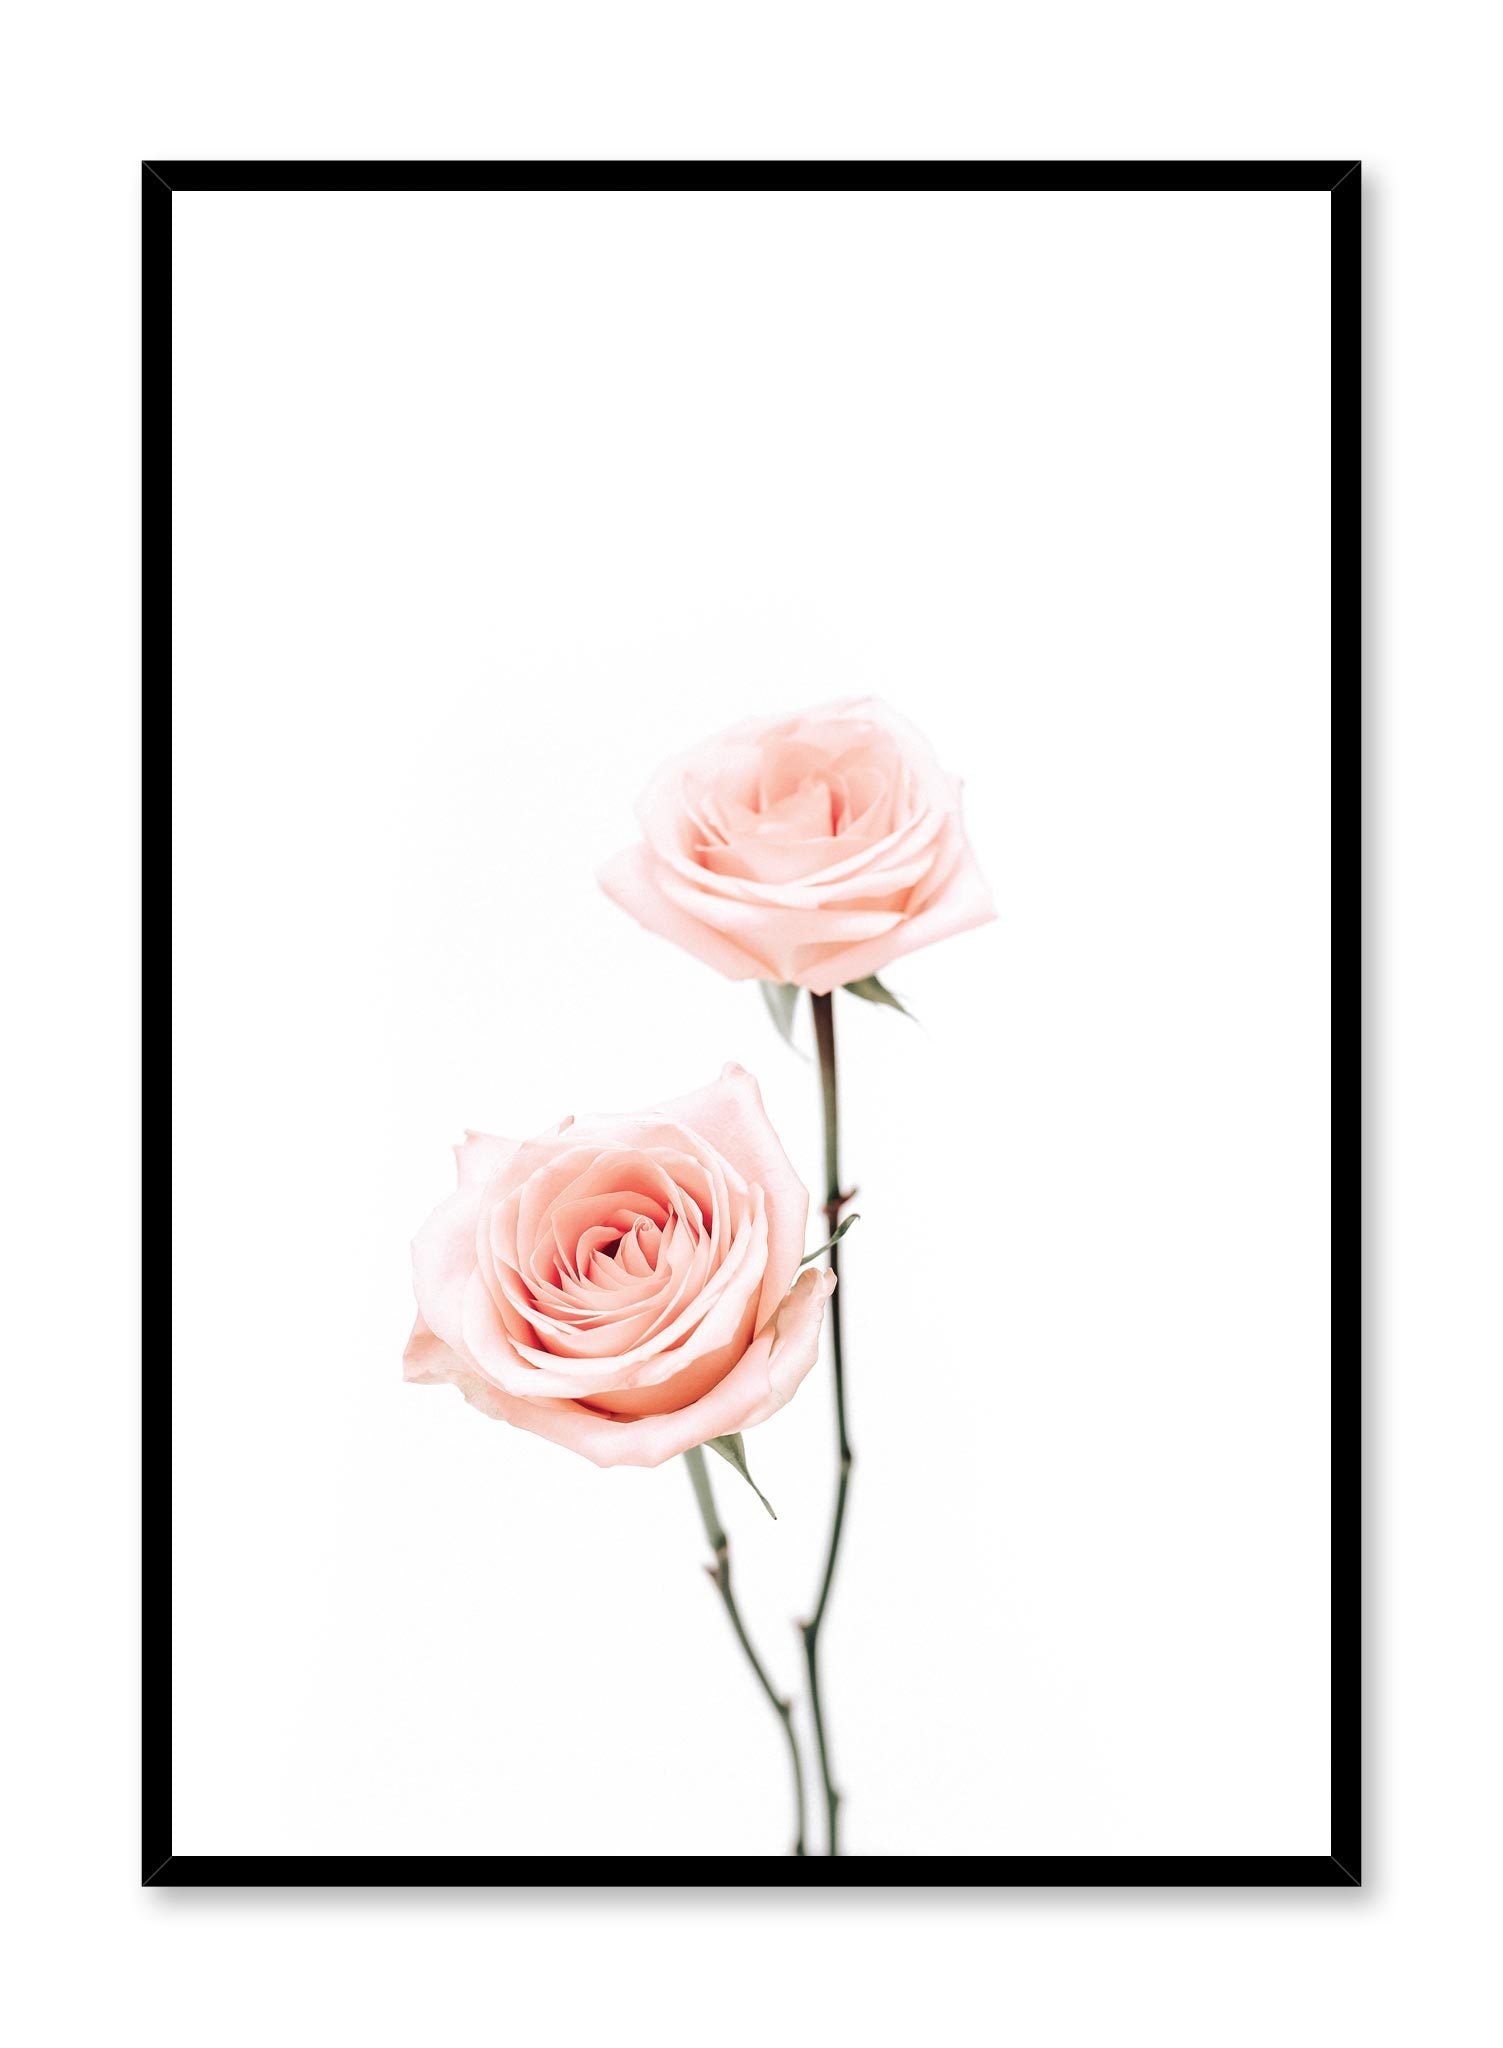 Minimalistic wall poster by Opposite Wall with pink roses floral photography